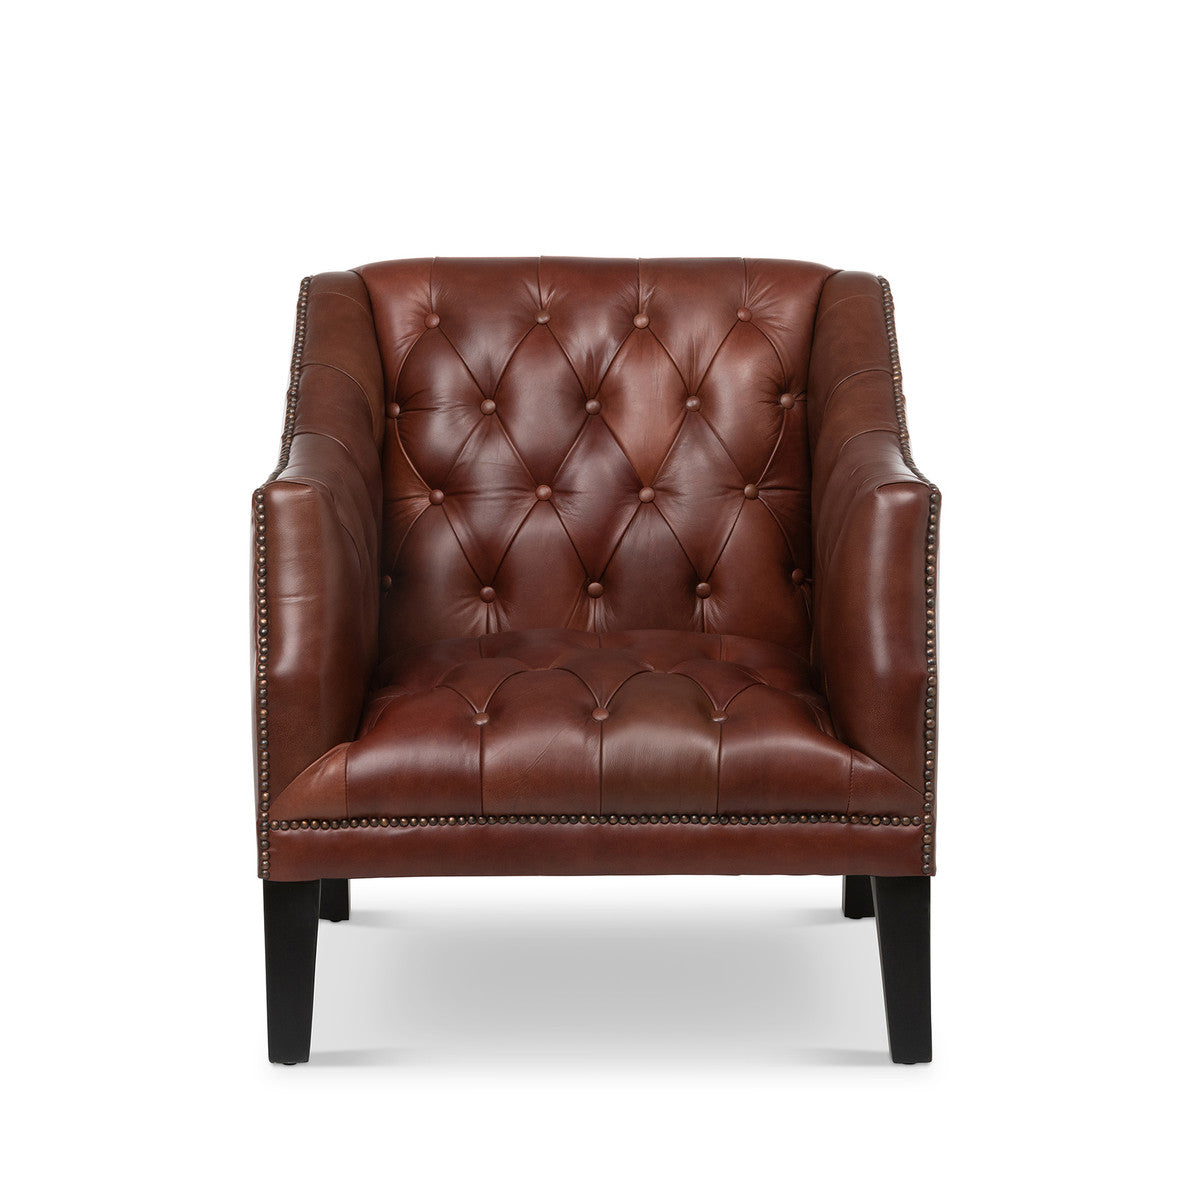 Mahogany Leather Library Chair, Cordovan